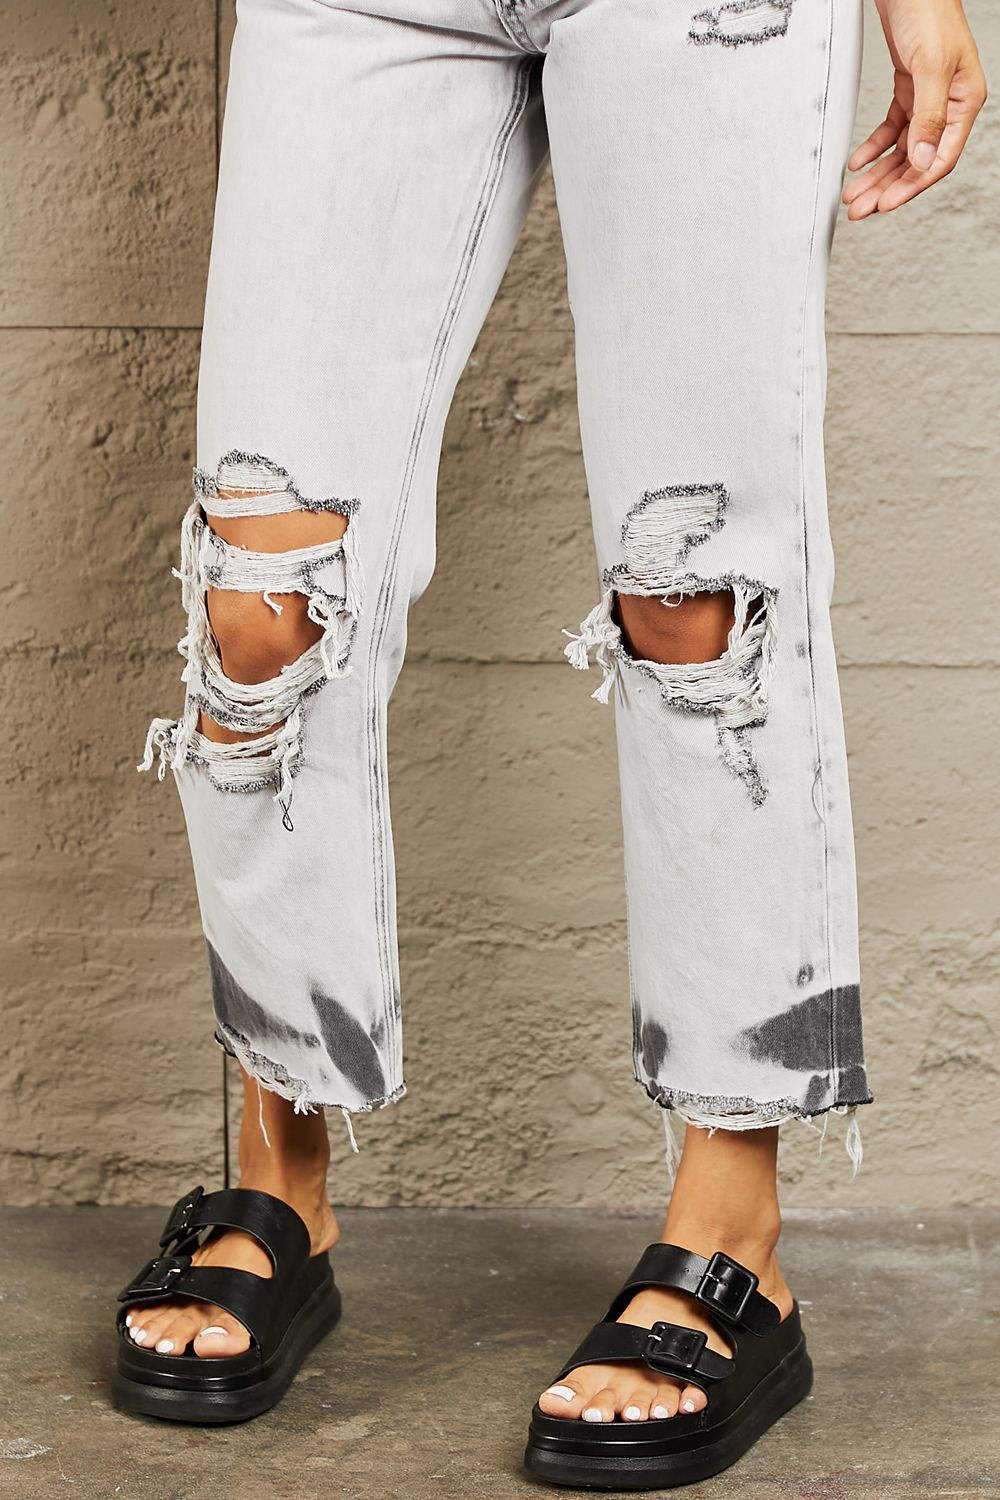 BAYEAS Bonnie Acid Wash Accent Cropped Mom Jeans